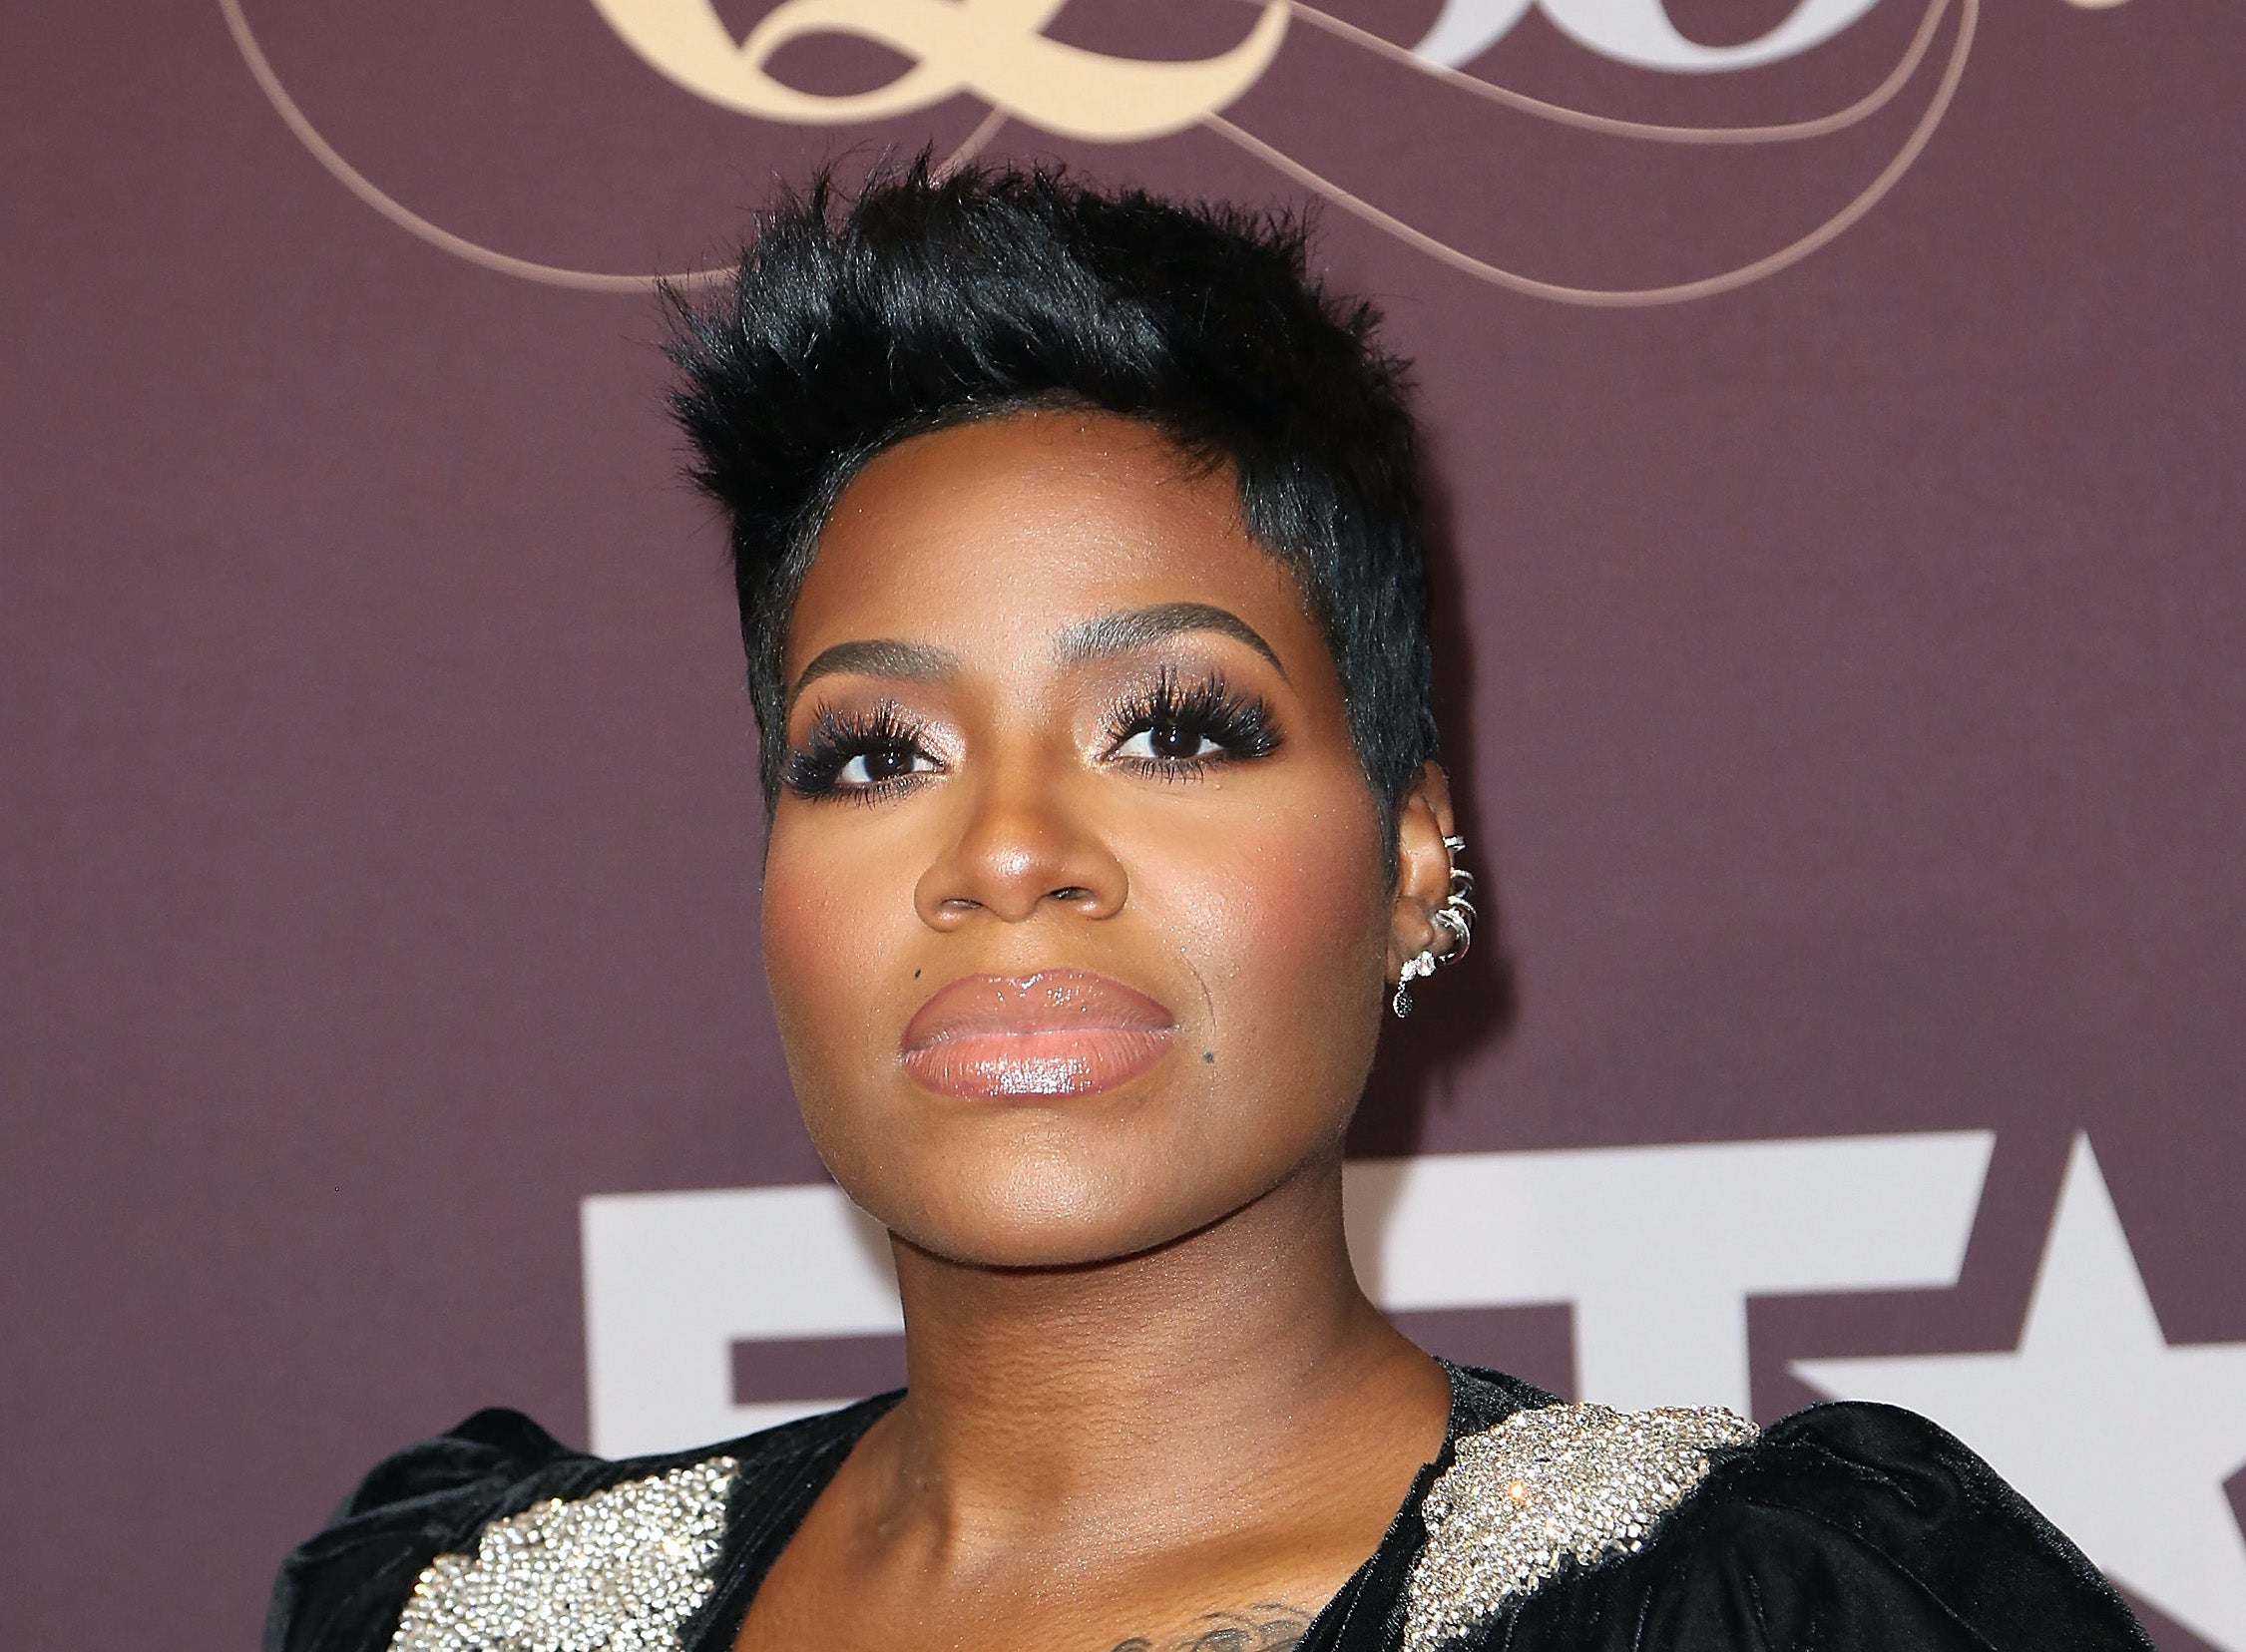 Fantasia Says A Lot Of Artists Are Quietly Struggling Financially: "We Don't Have It"